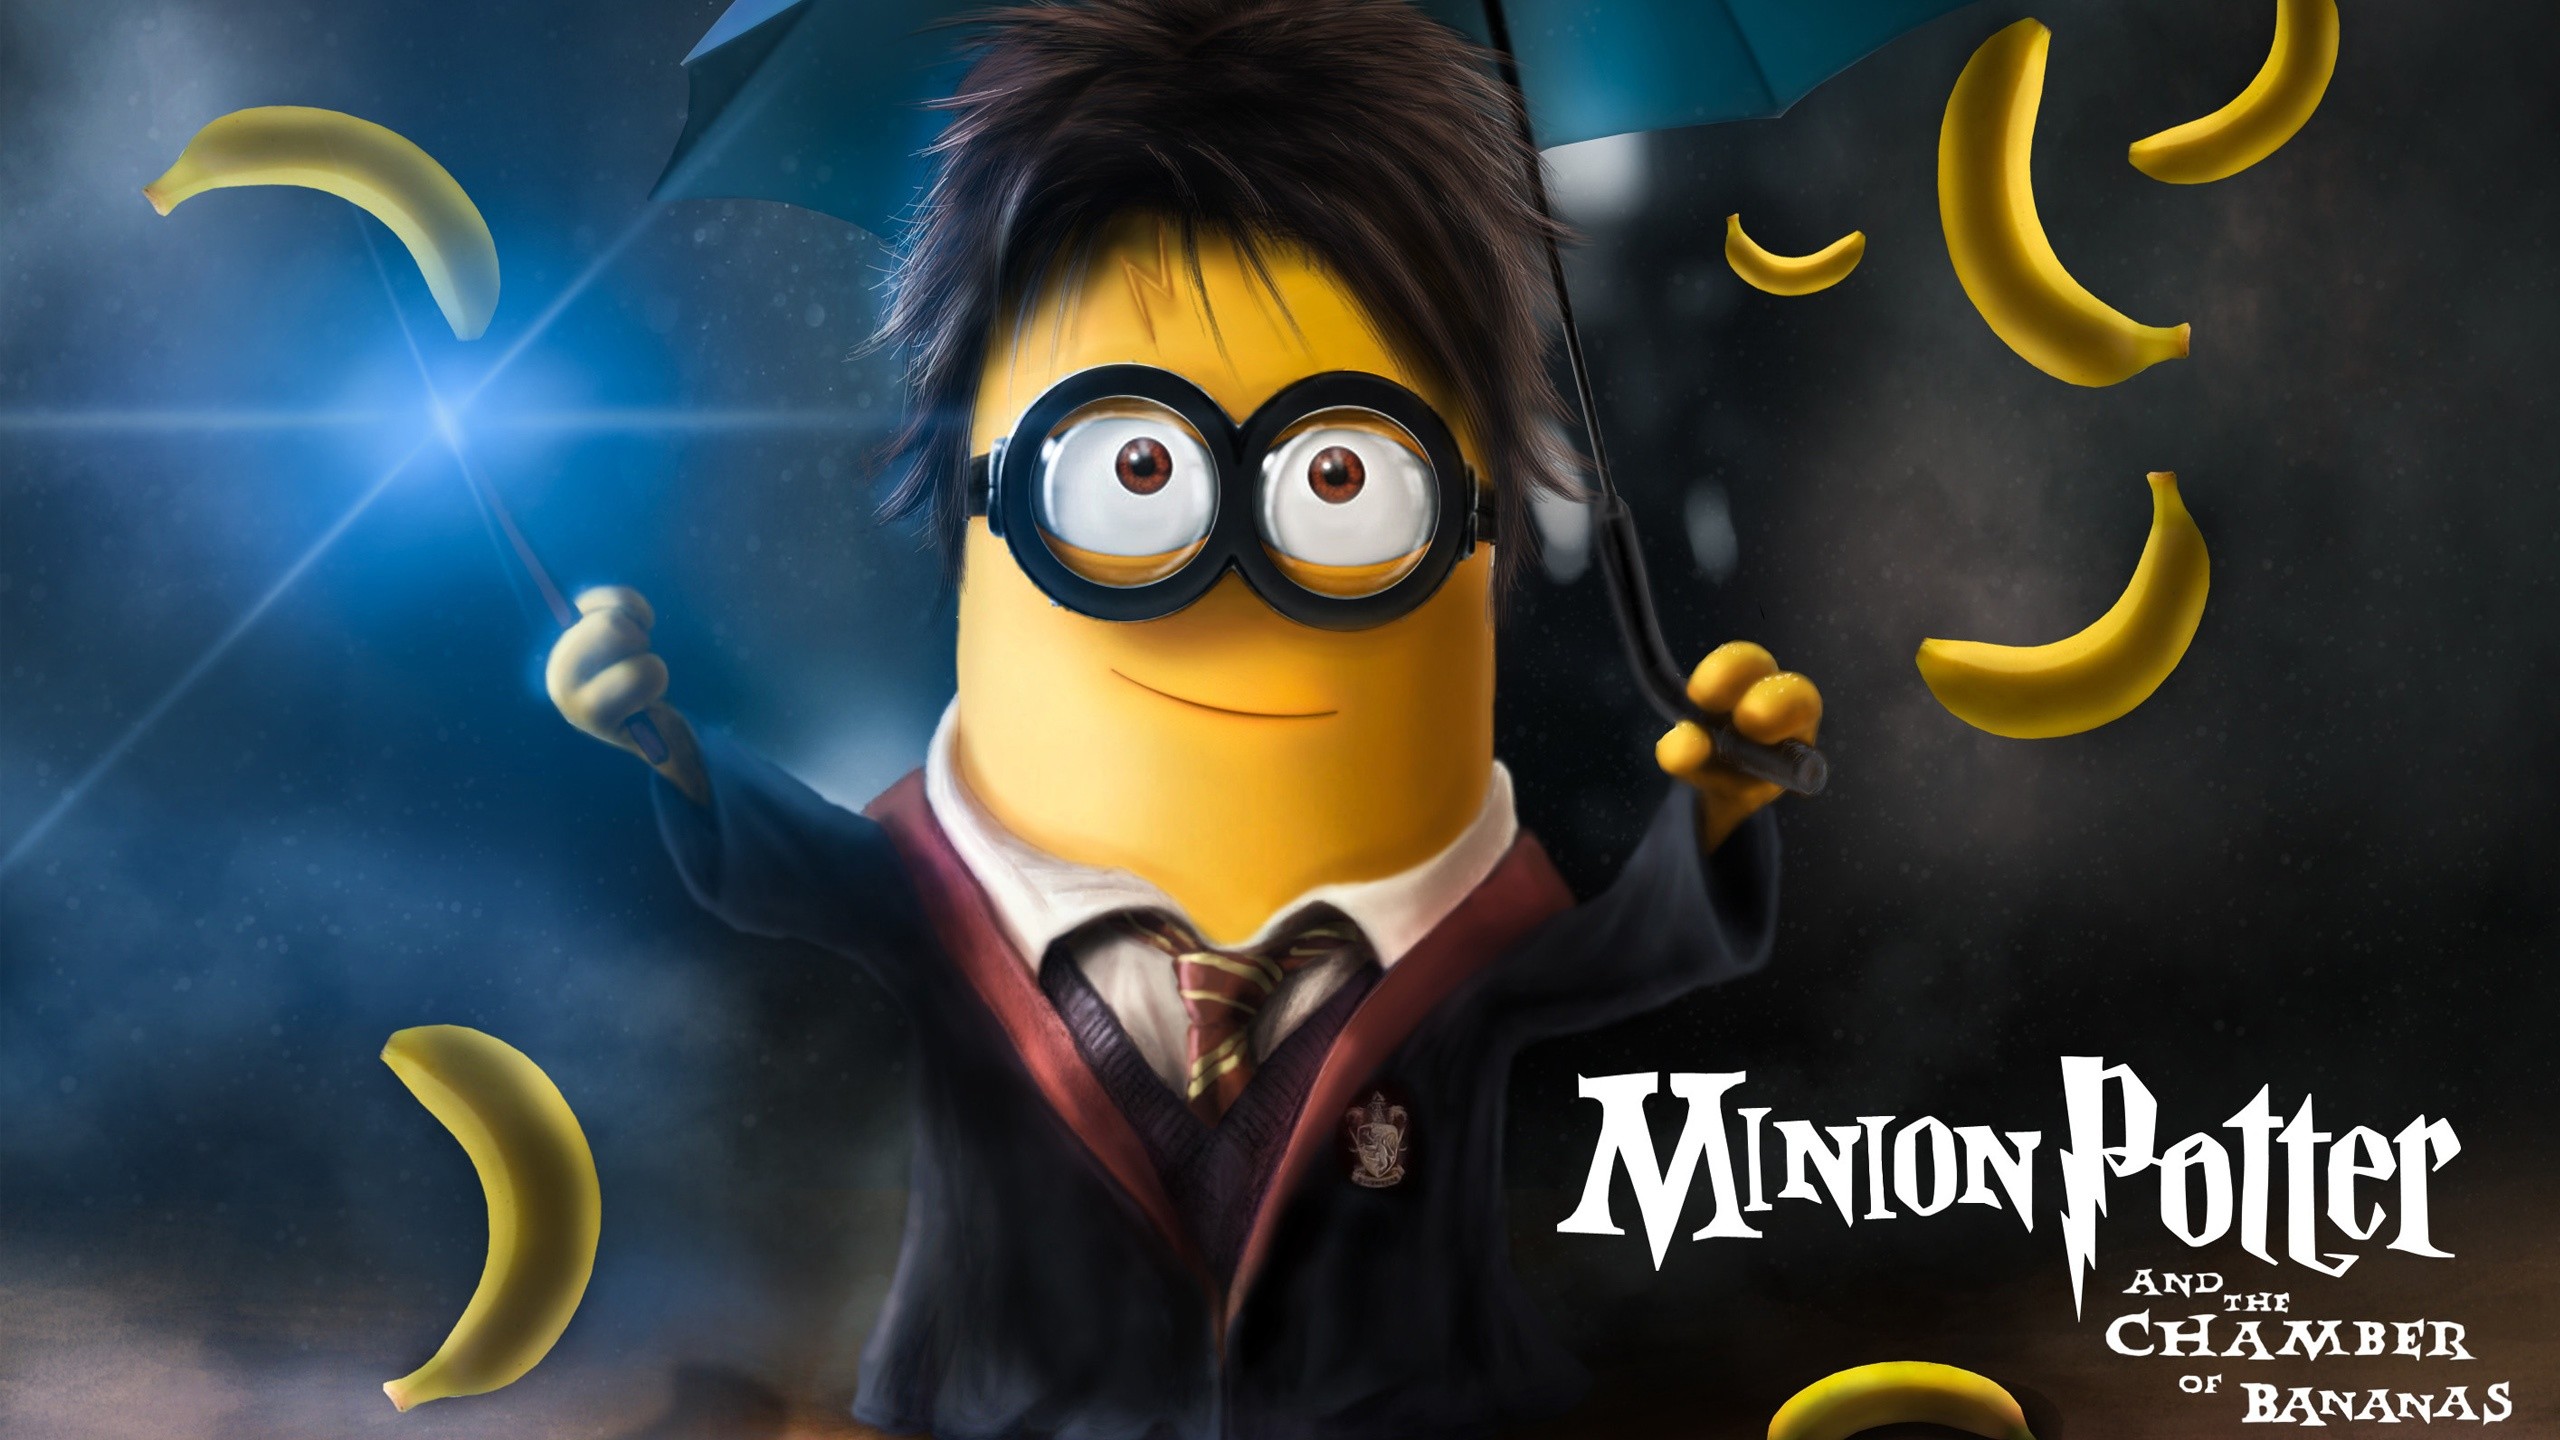 Minion Harry Potter, free computer desktop hd wallpapers, pictures, images